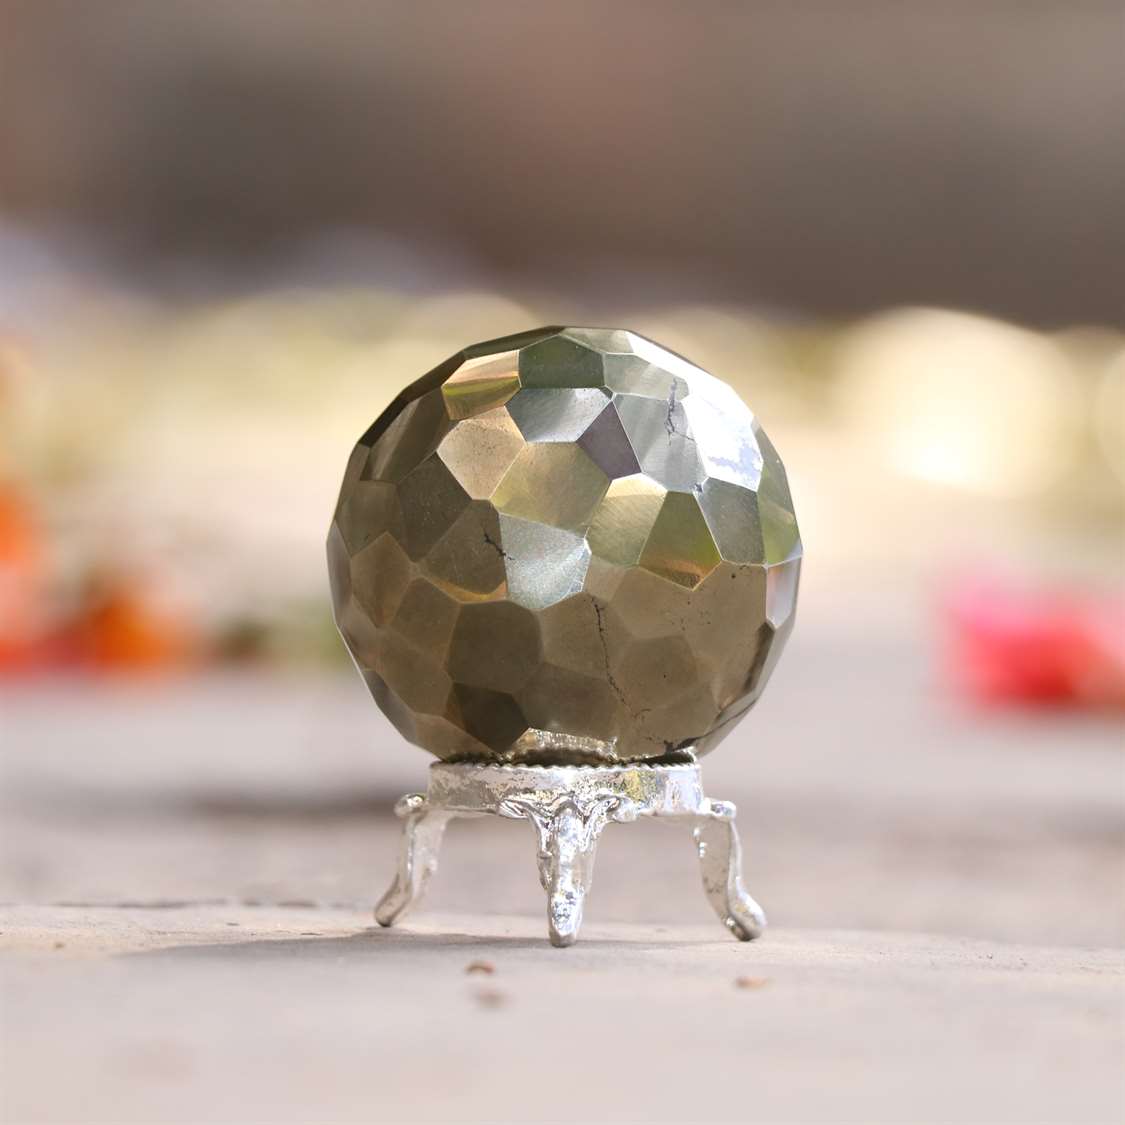 Golden Pyrite Crystal Sphere Ball (45mm) - Wealth and Confidence